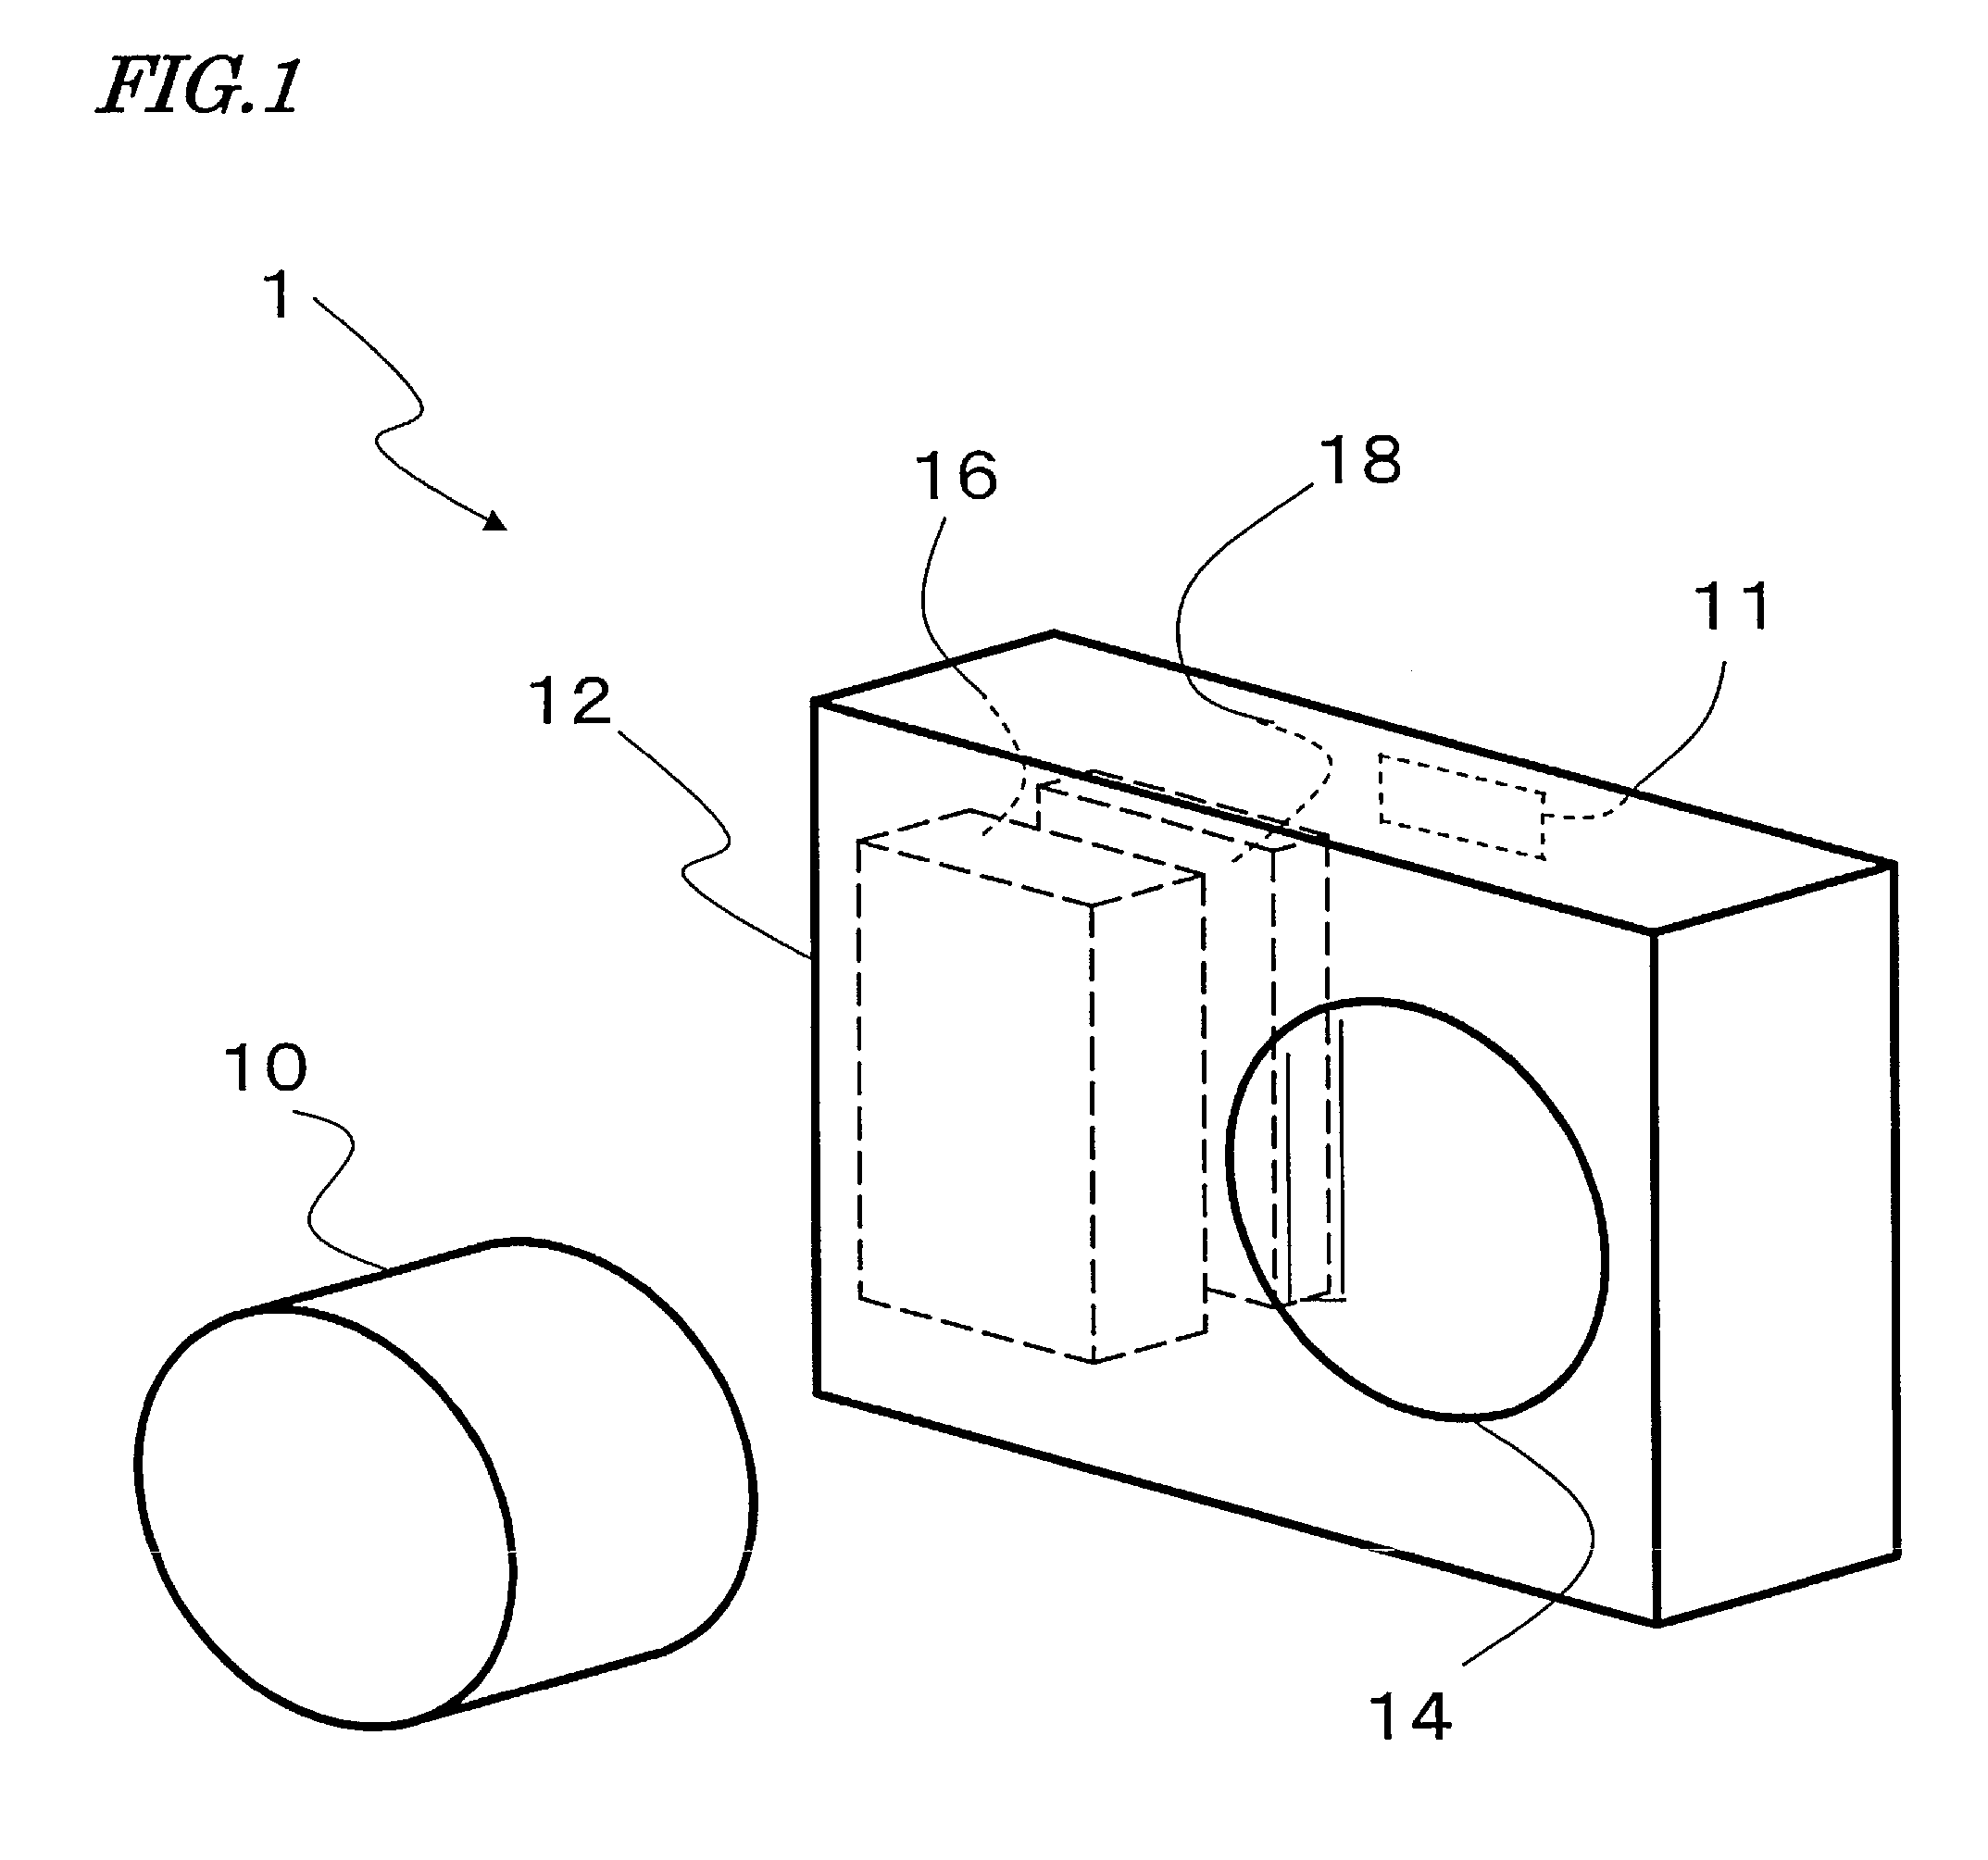 Camera with interchangeable lenses having electrical circuitry